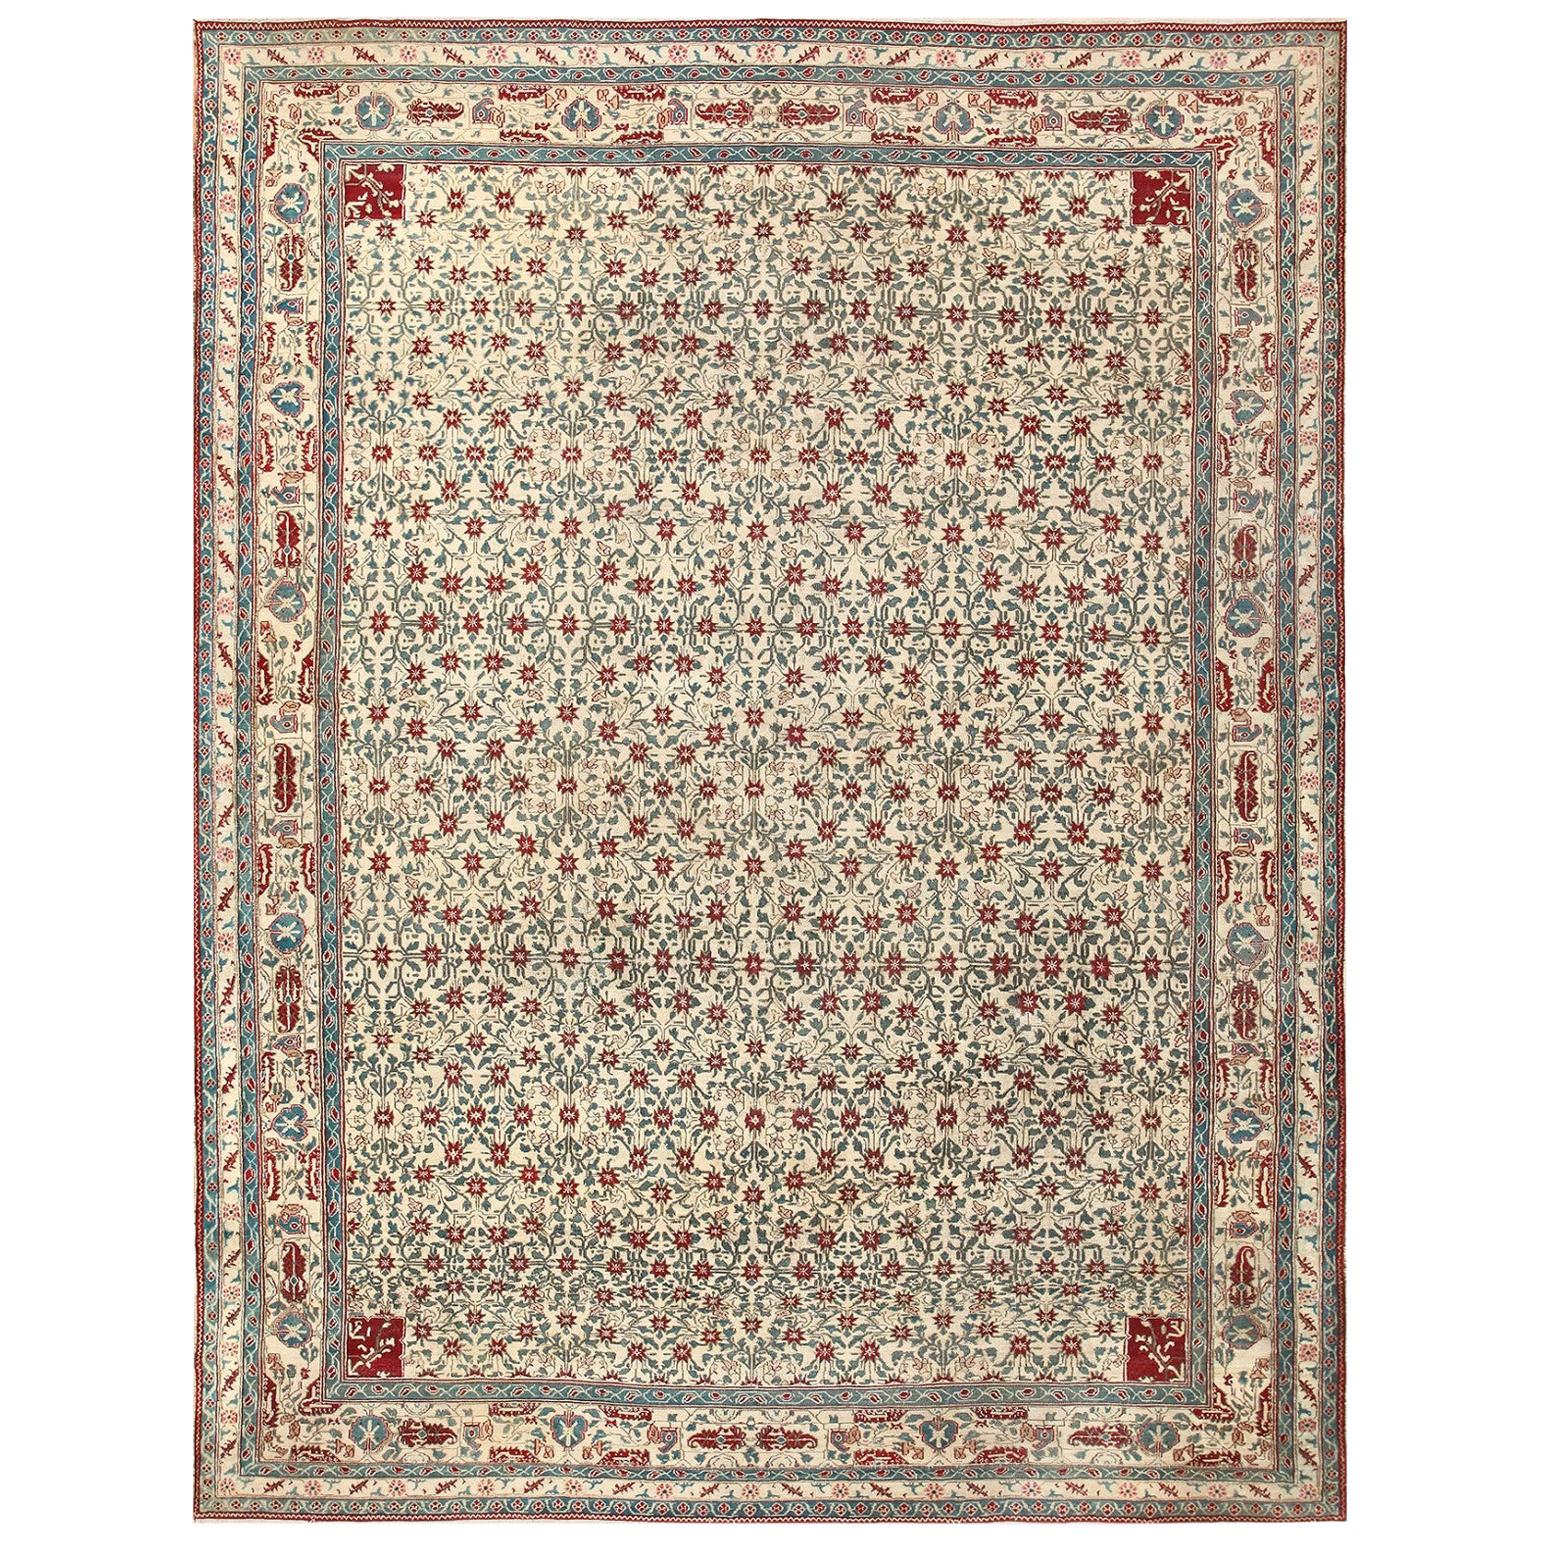 Antique Indian Agra Rug. Size: 8 ft 10 in x 11 ft 6 in